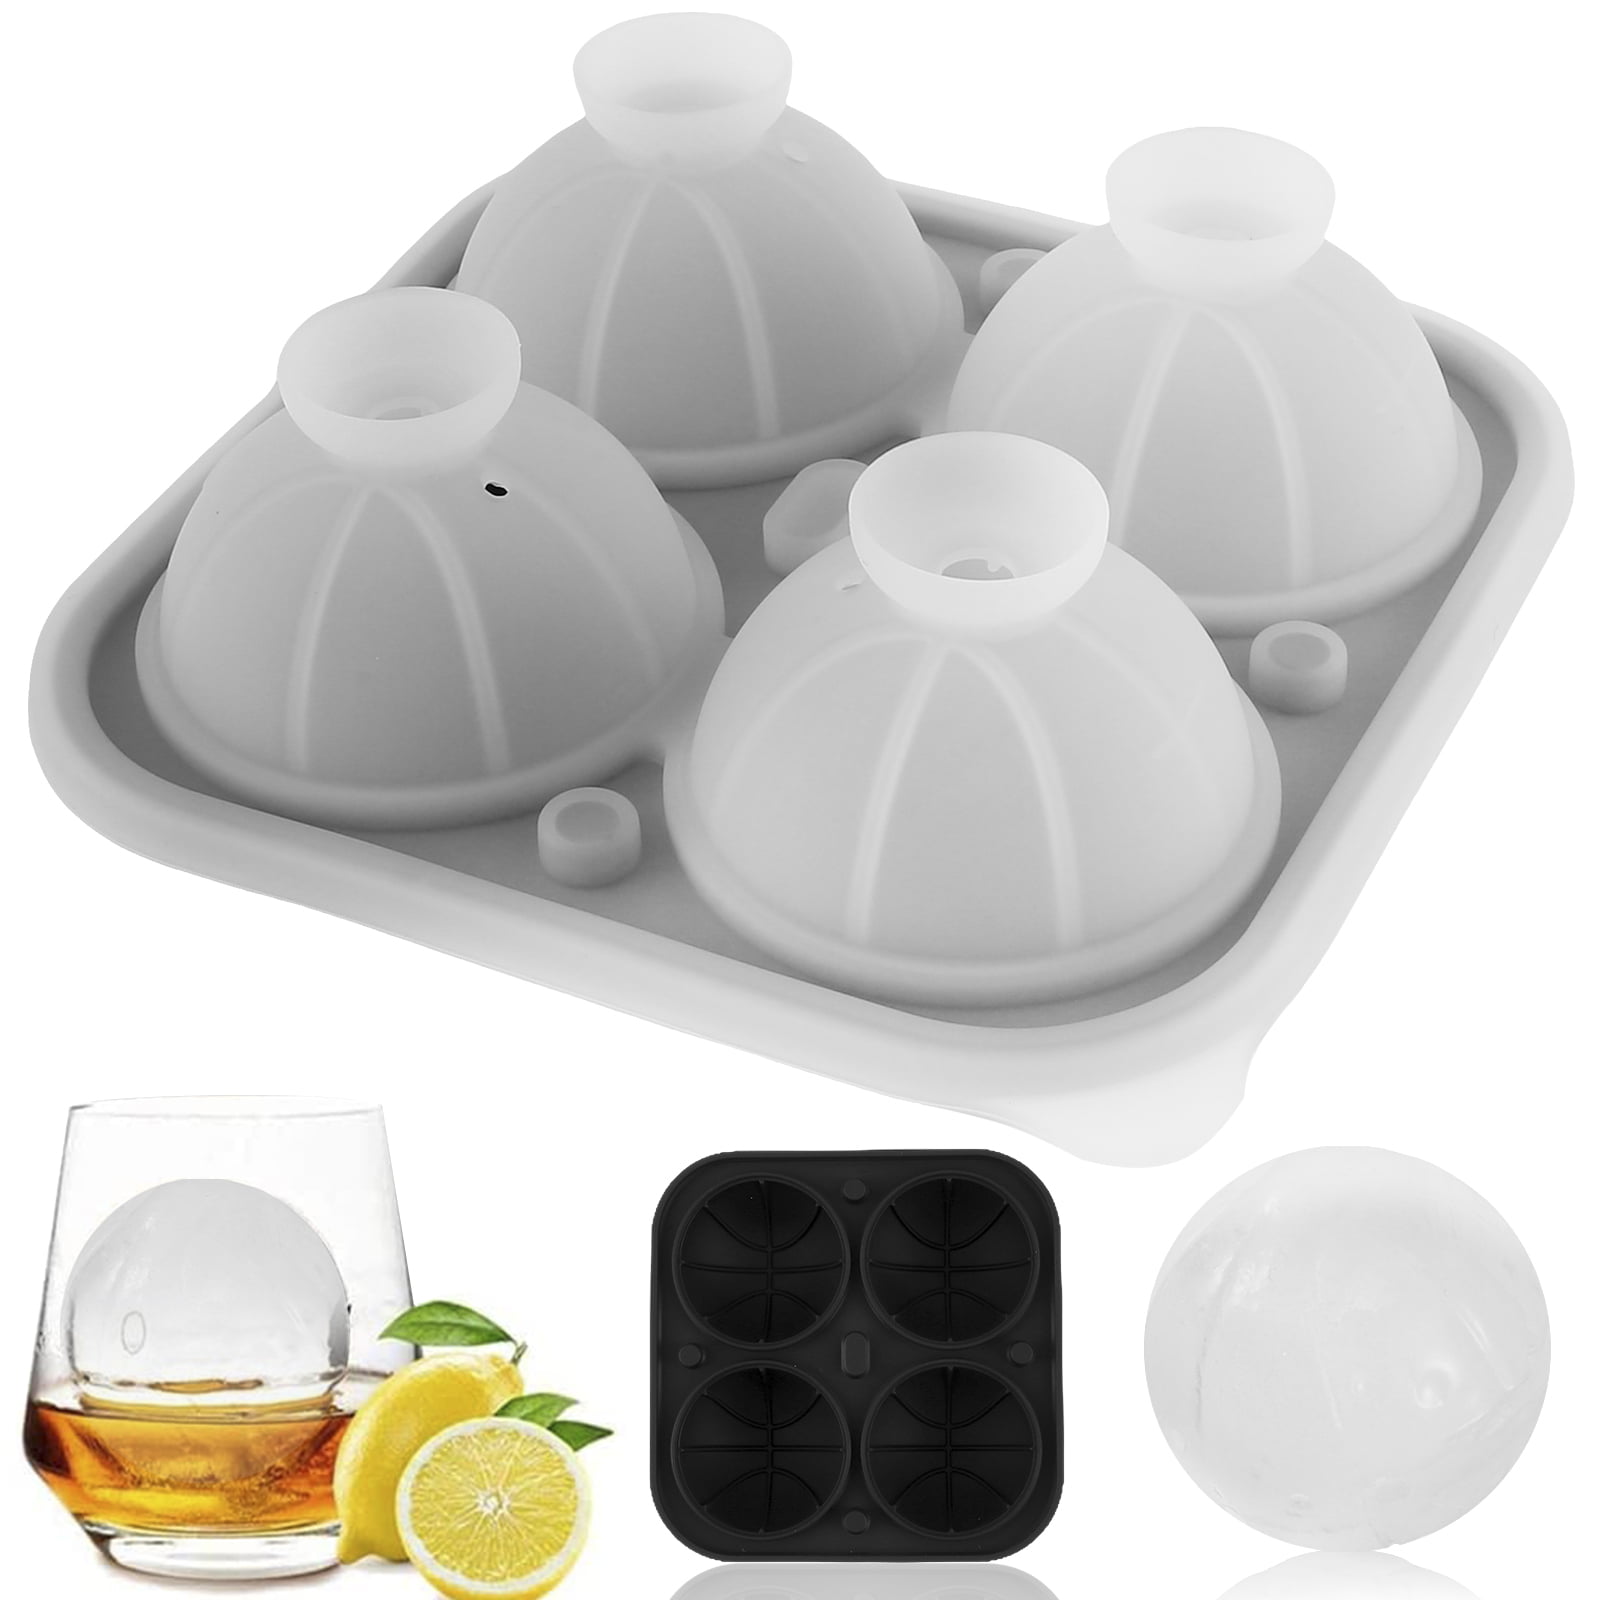 Planet Shapes Ice Cube Tray, Ice Cube Mold Fun Shapes, 4 Large Ice Balls  for Chilling Whiskey Cocktails Drinks, Silicone Sphere Ice Mold Chocolate